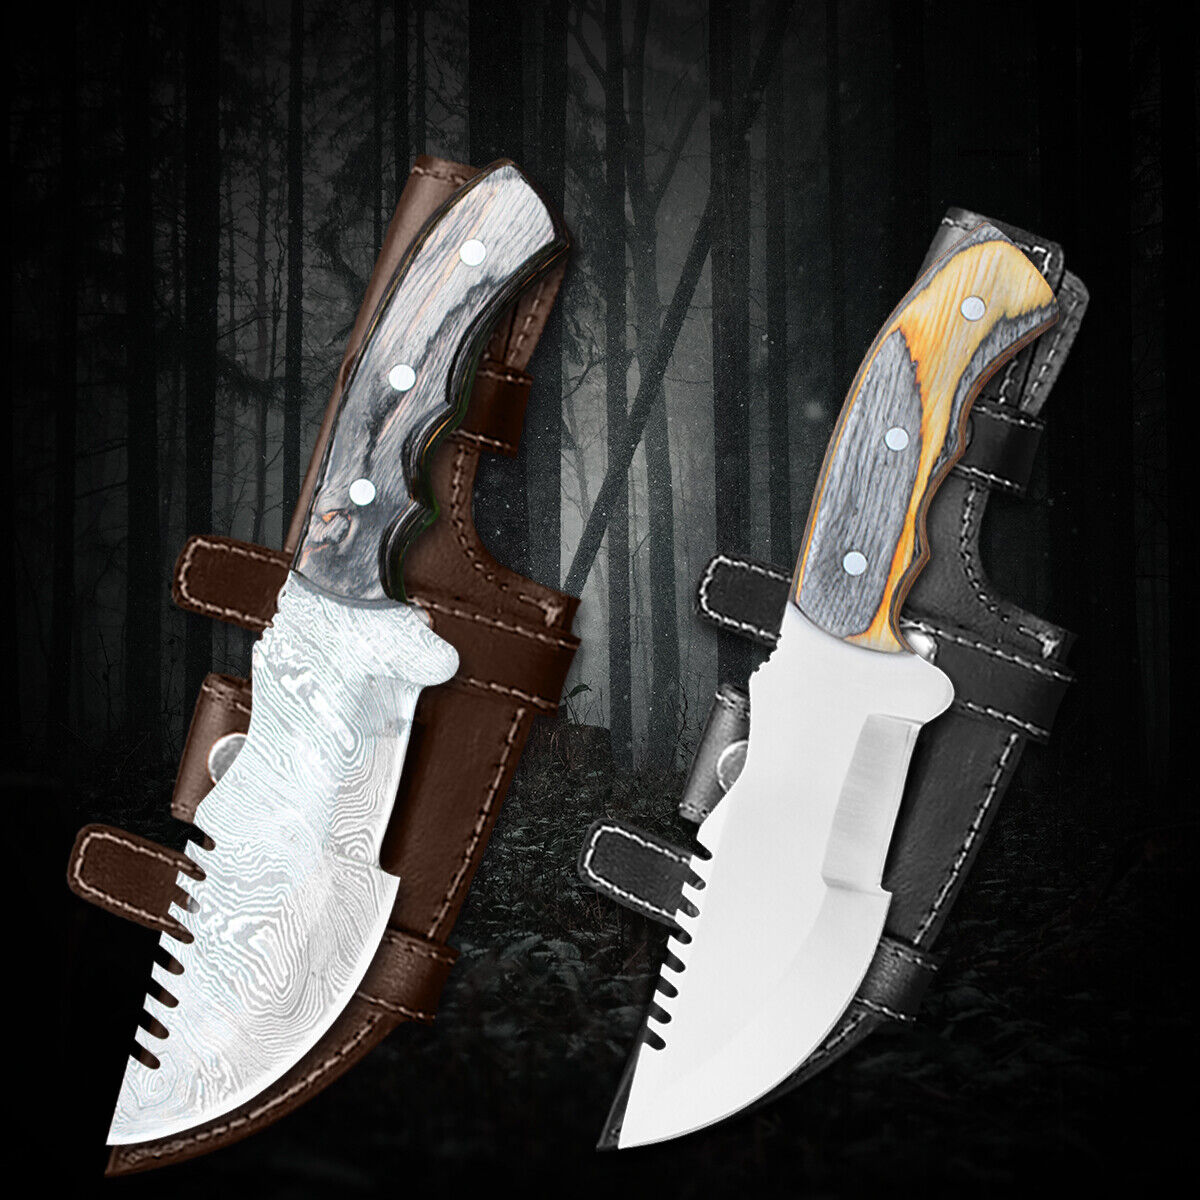 TRACKER® Camping knife2 pcs Set For Outdoor, Camping, Survival & Hunting Set